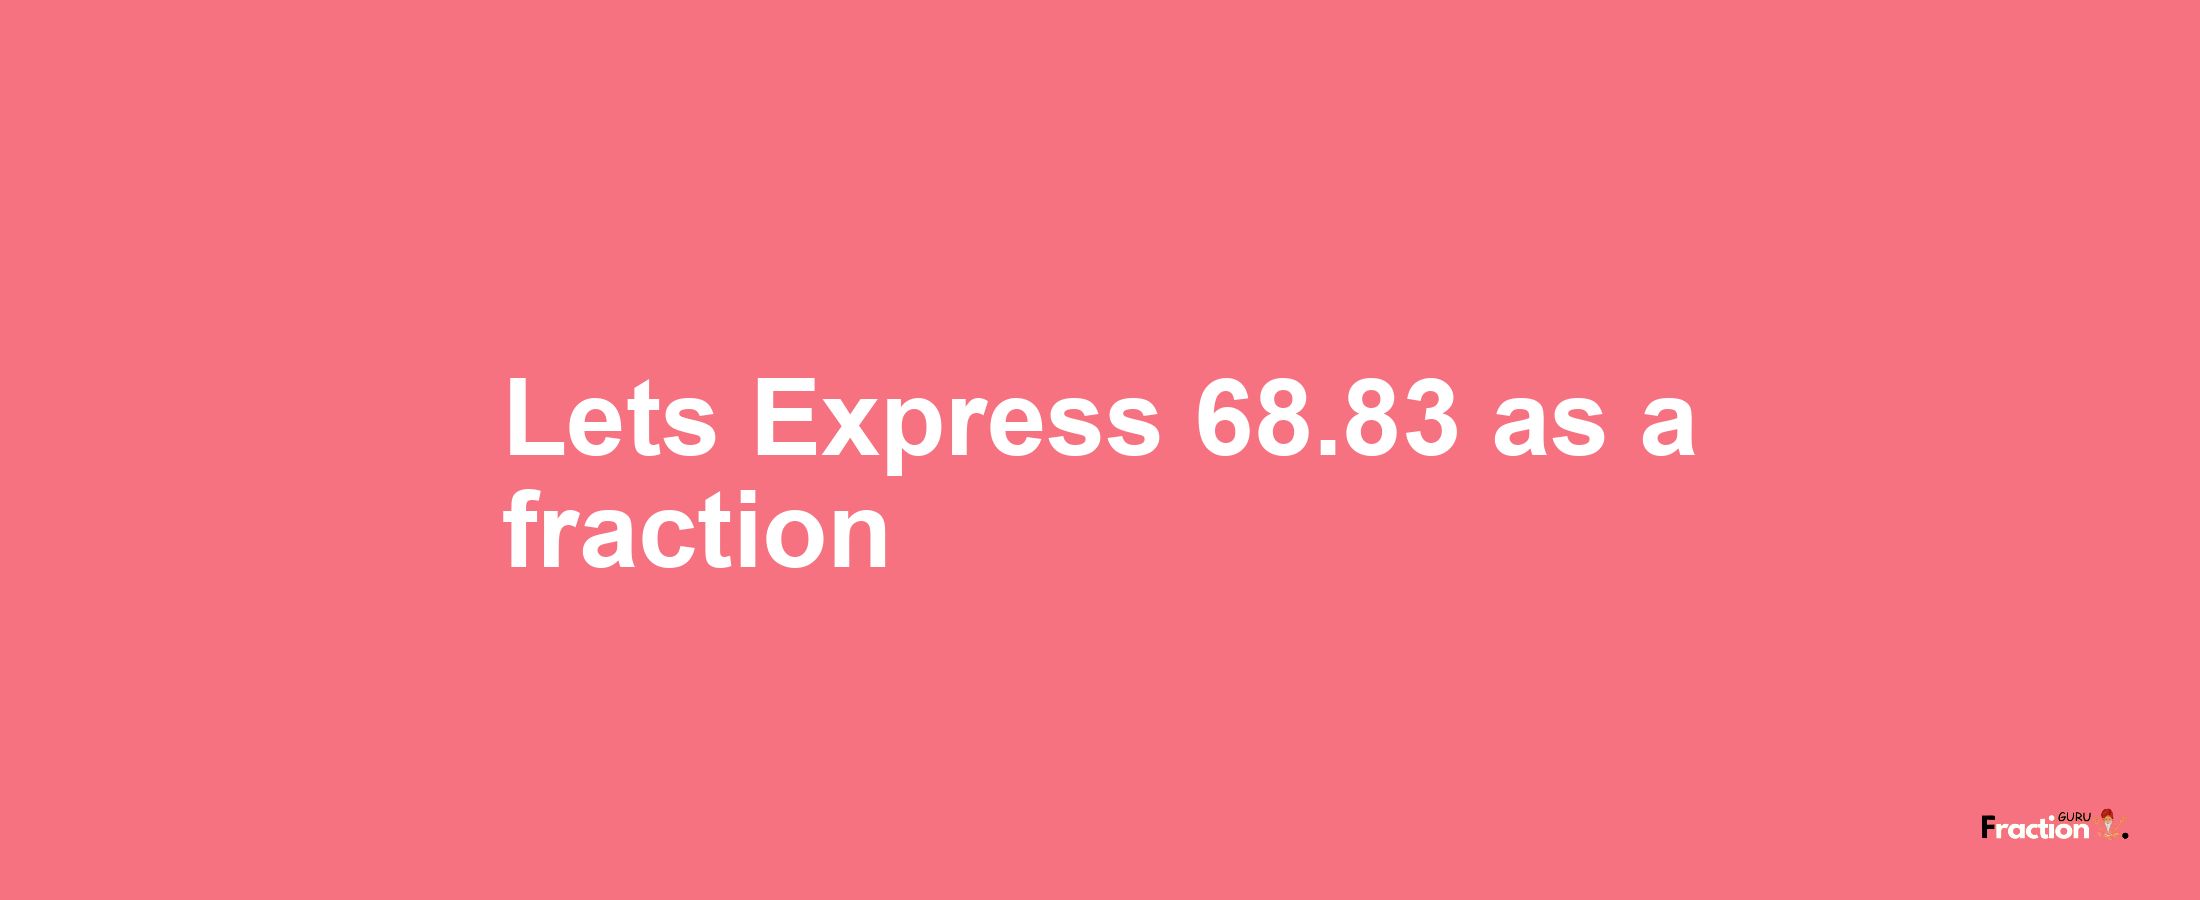 Lets Express 68.83 as afraction